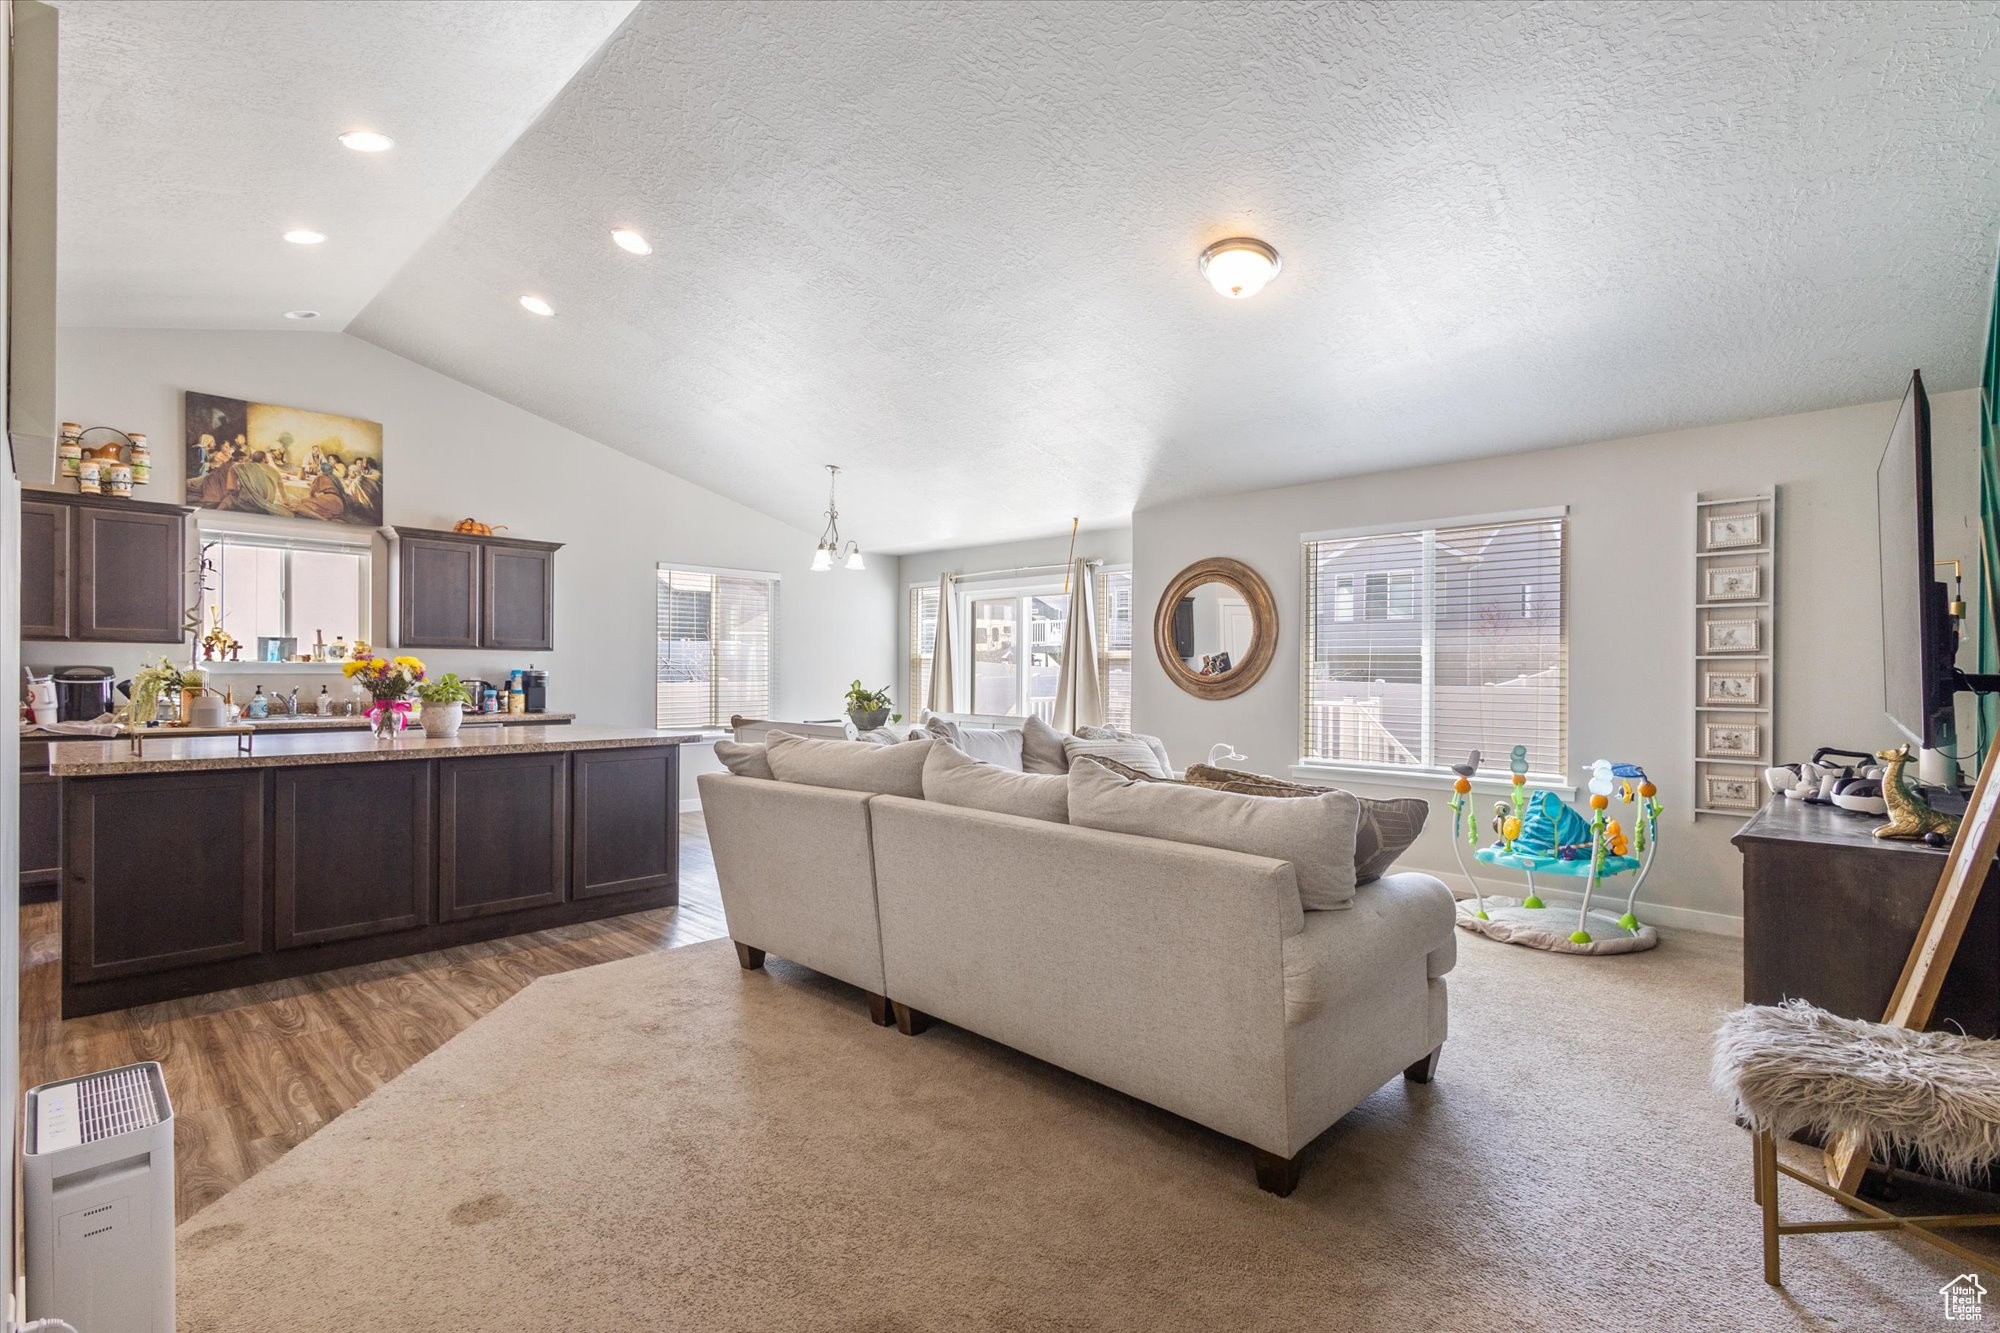 Living room featuring vaulted ceiling and carpet